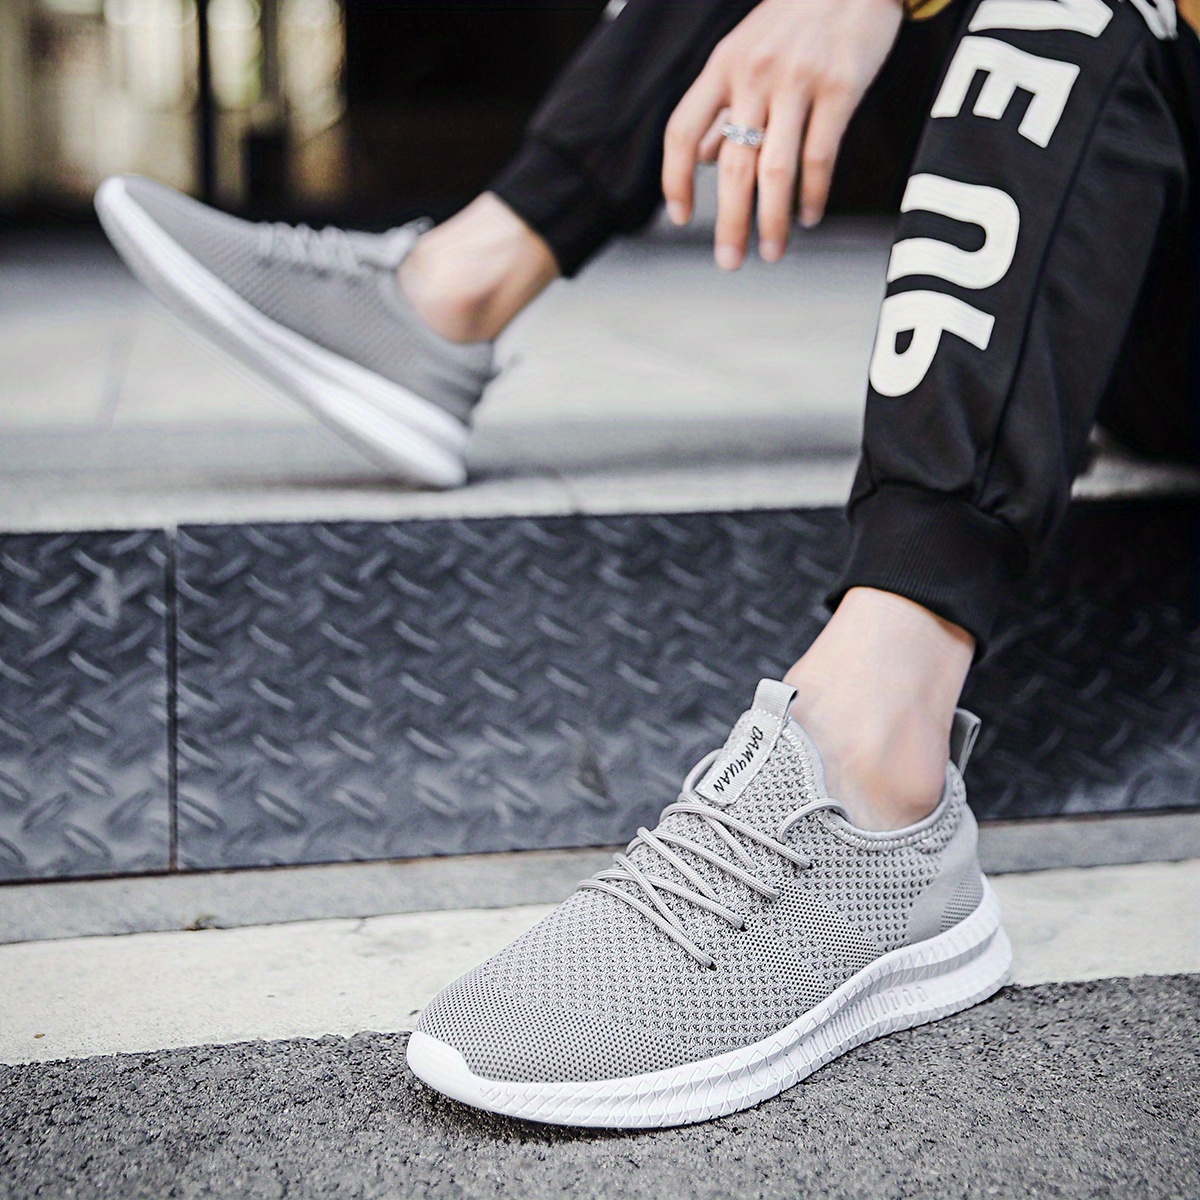 mens trendy breathable lace up knit sneakers with assorted colors casual outdoor running walking shoes details 12